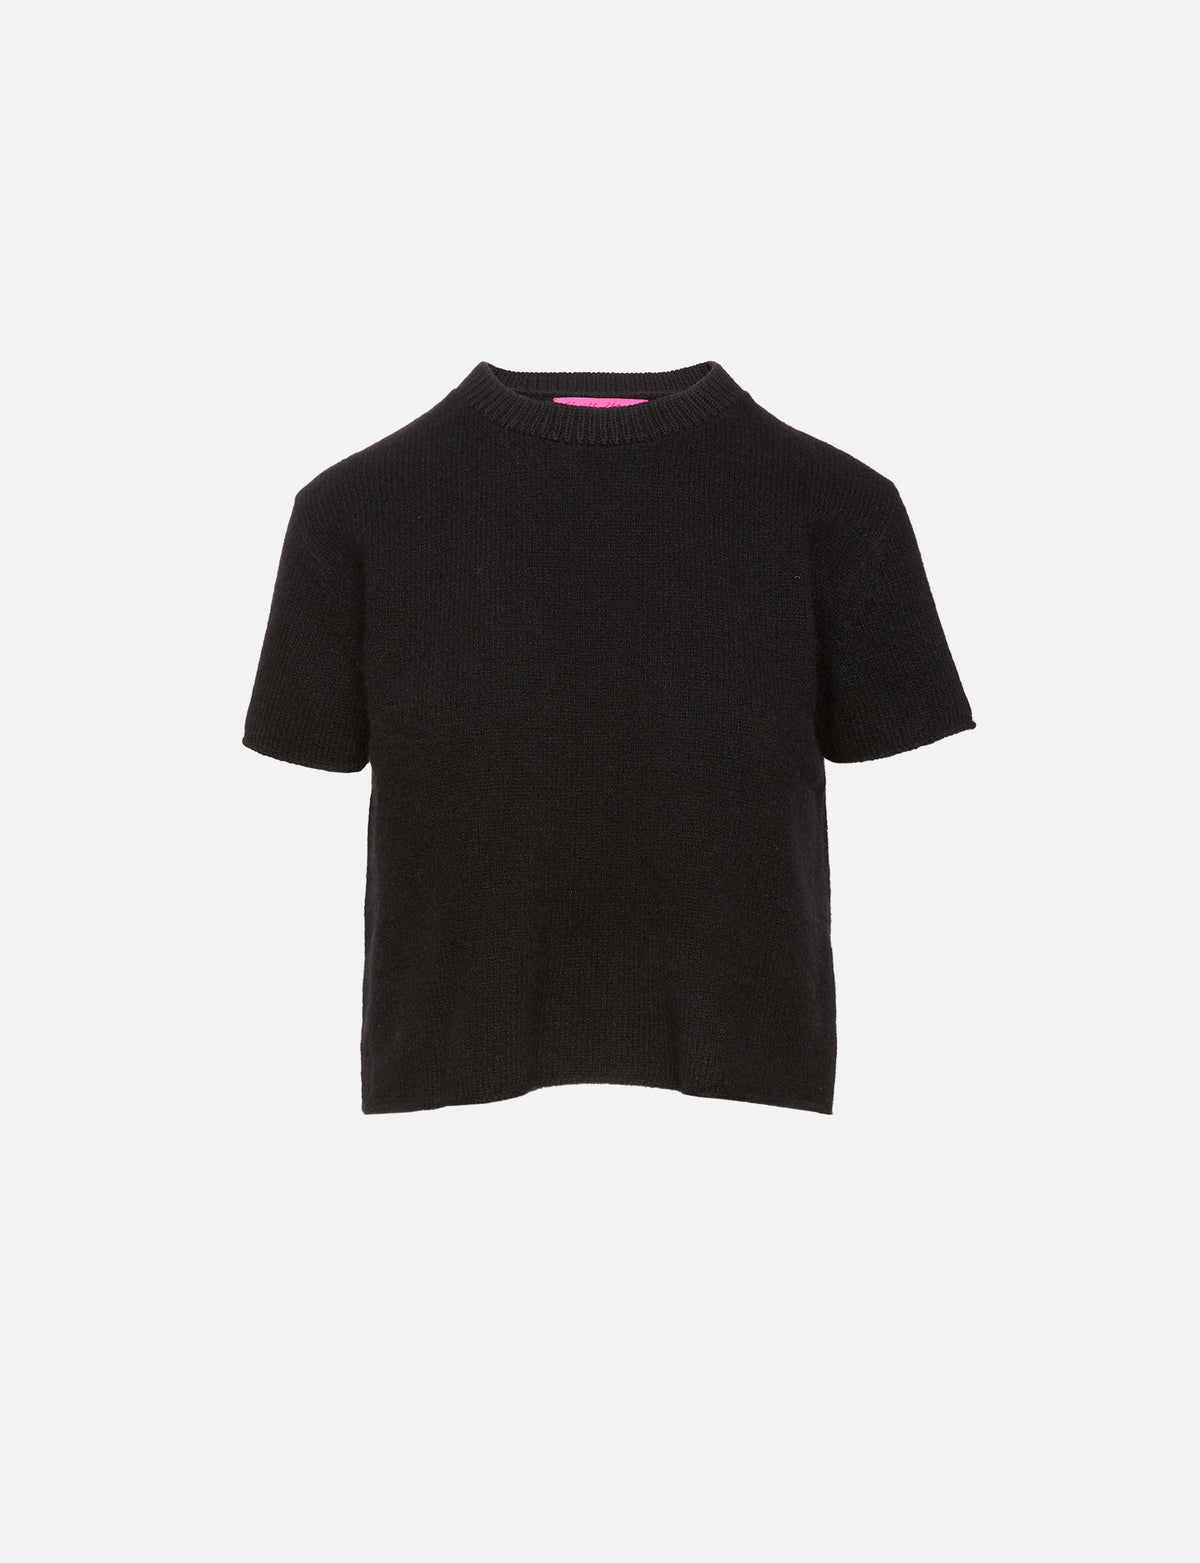 view 1 - Cashmere Short Sleeve Top